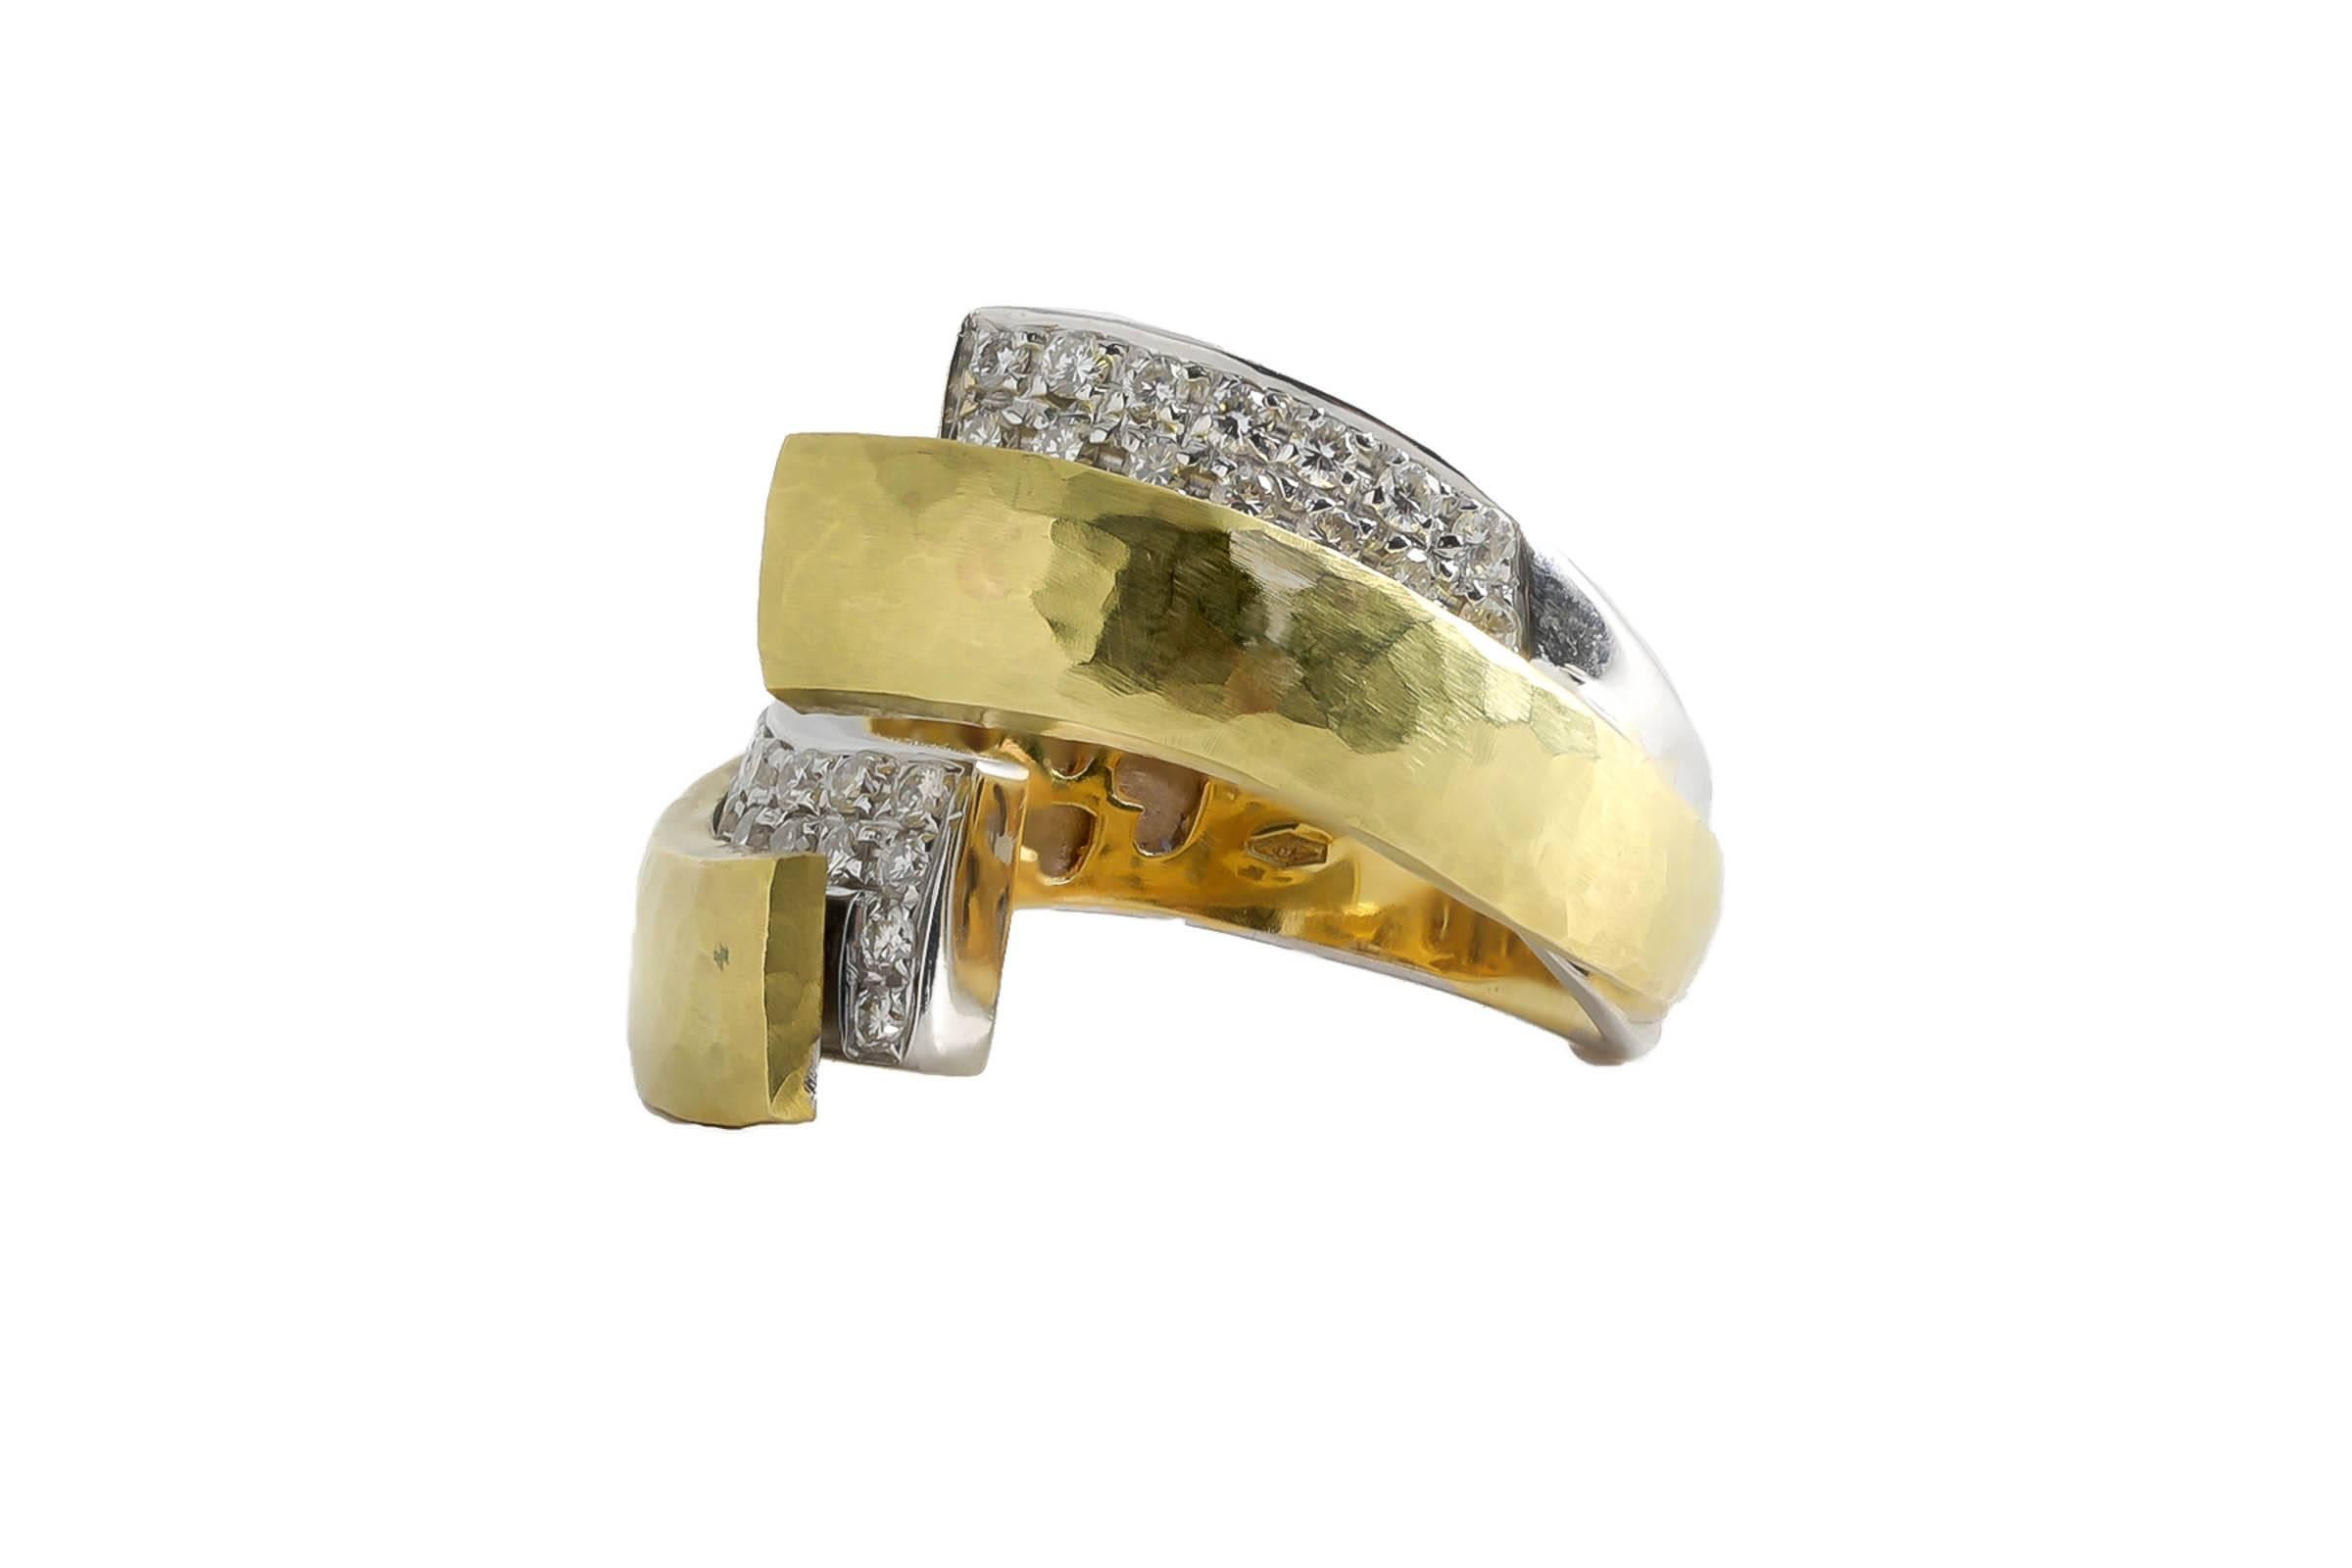 18K gold hammered finish ring containing one carat of pave set diamonds.
Can be sized.